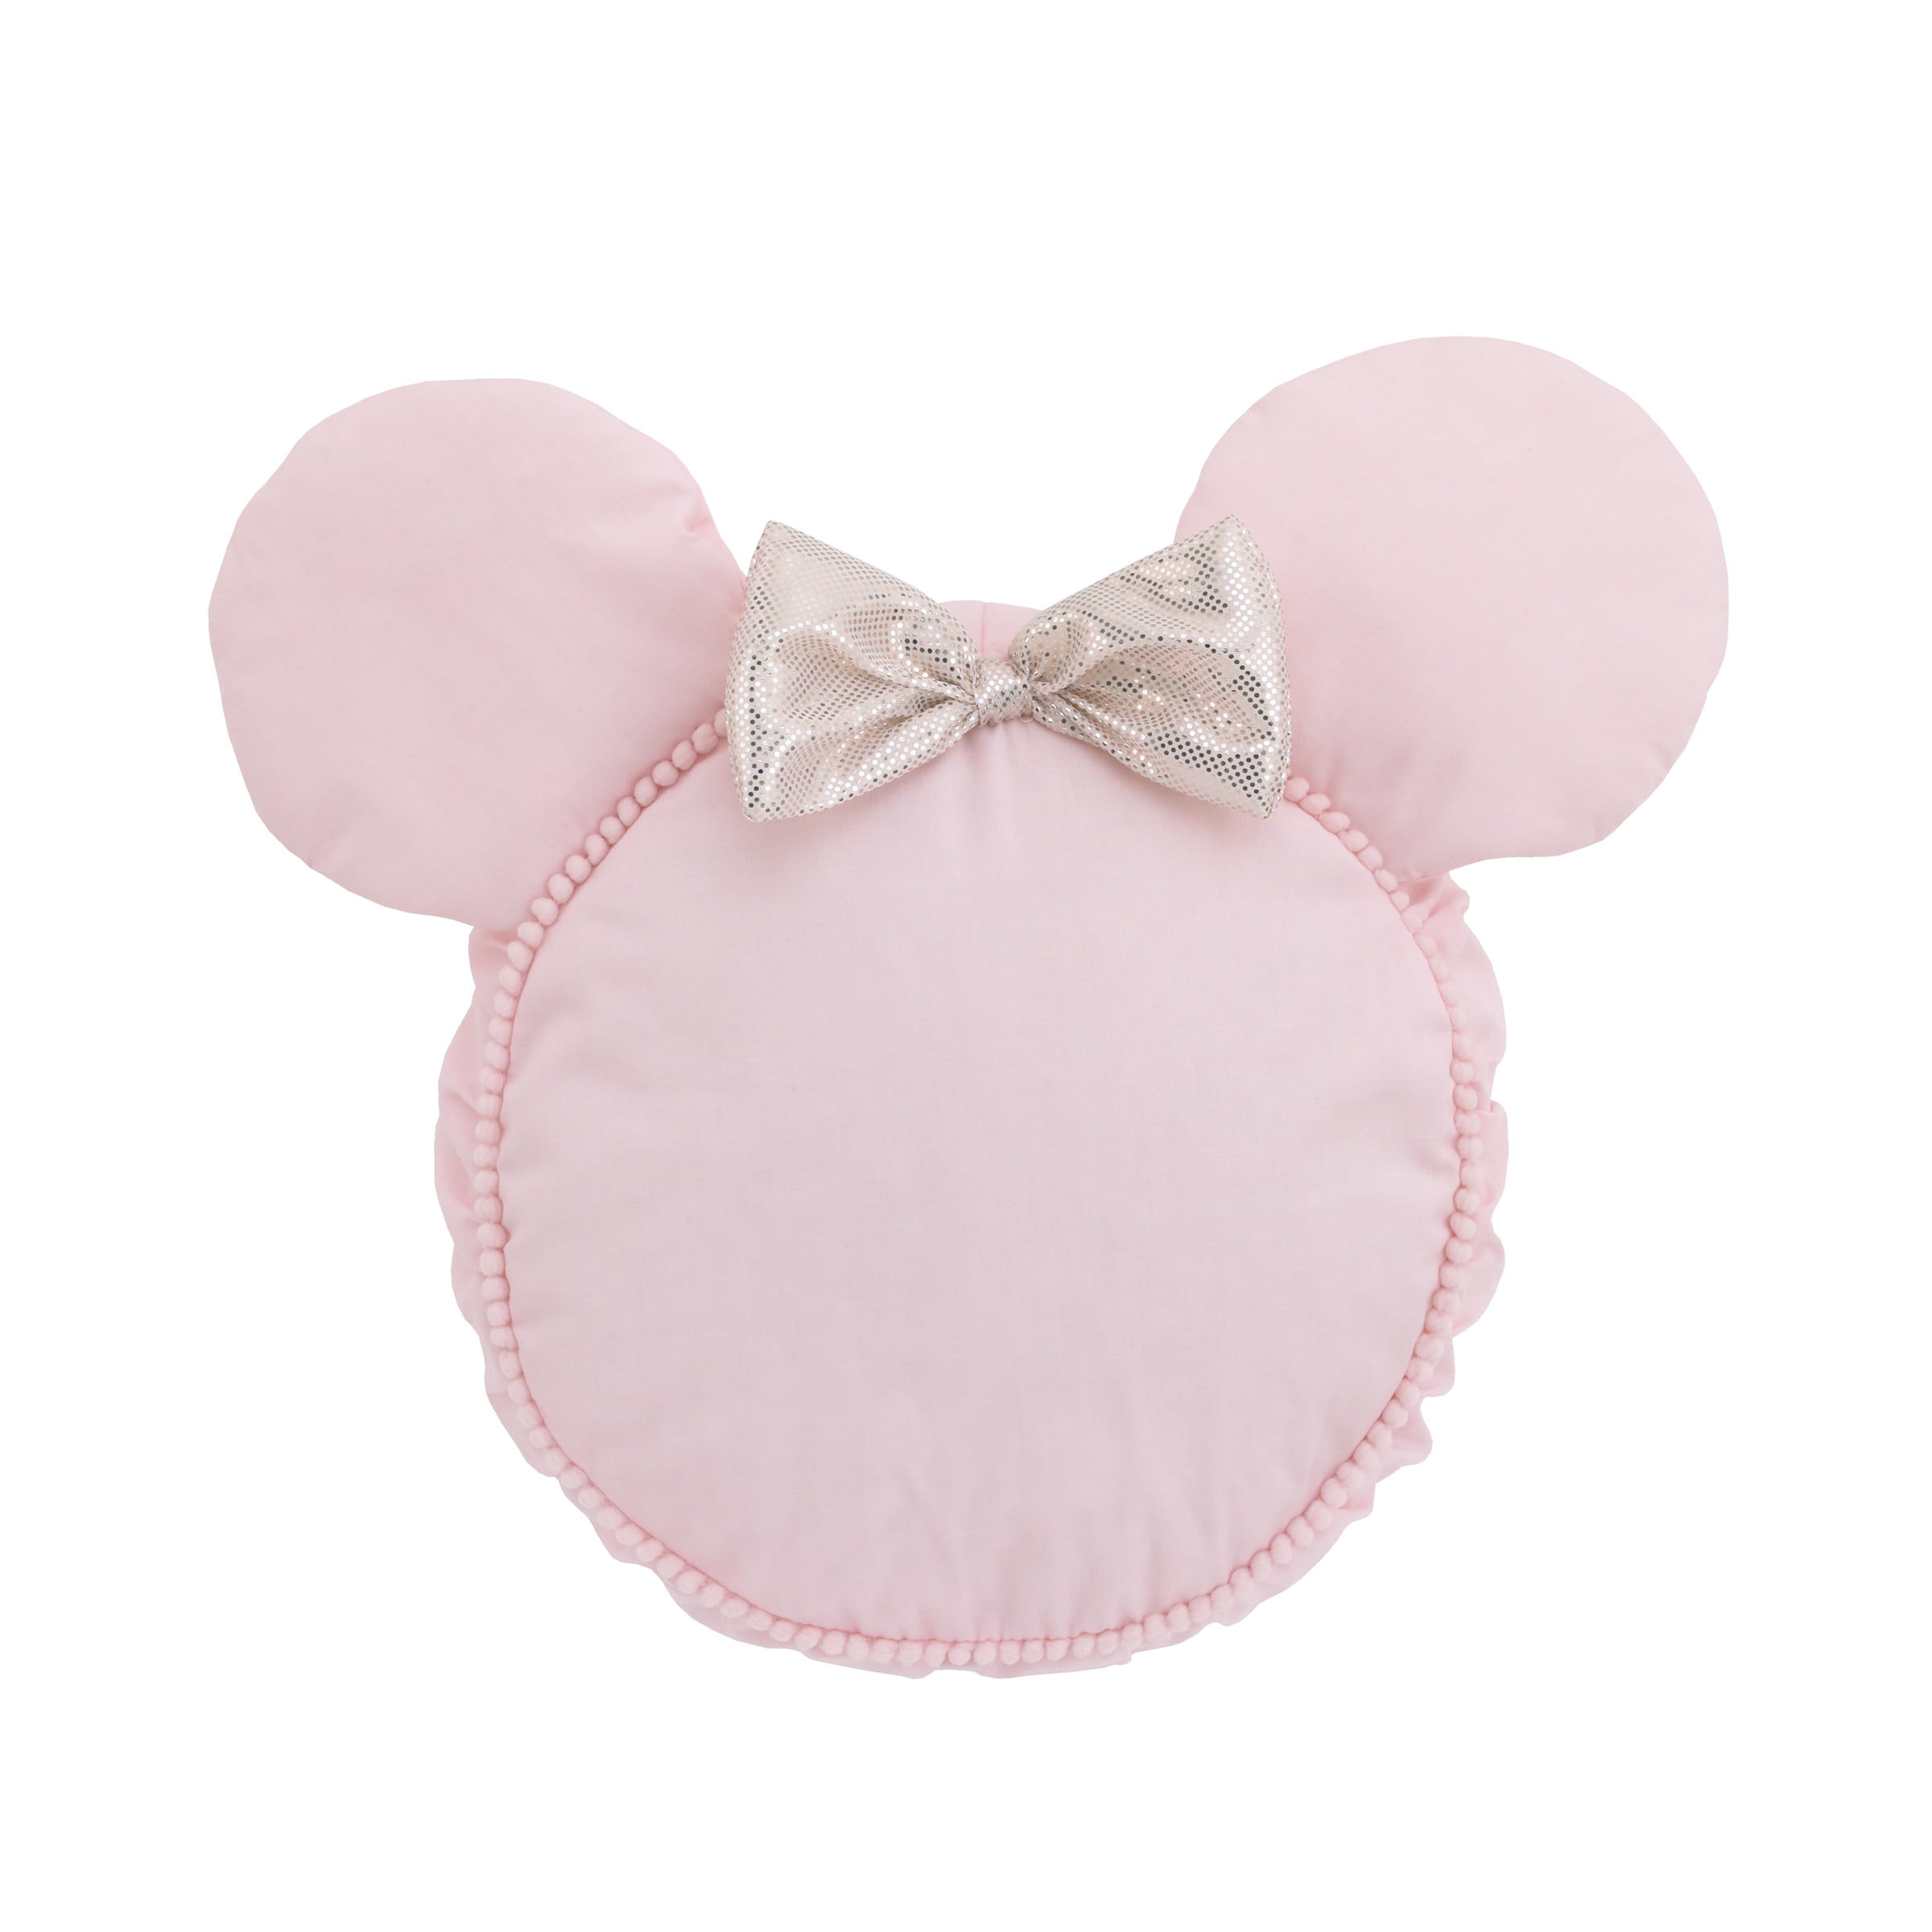 DISNEY MINNIE MOUSE HEAD SHAPED FILLED CUSHION PILLOW 